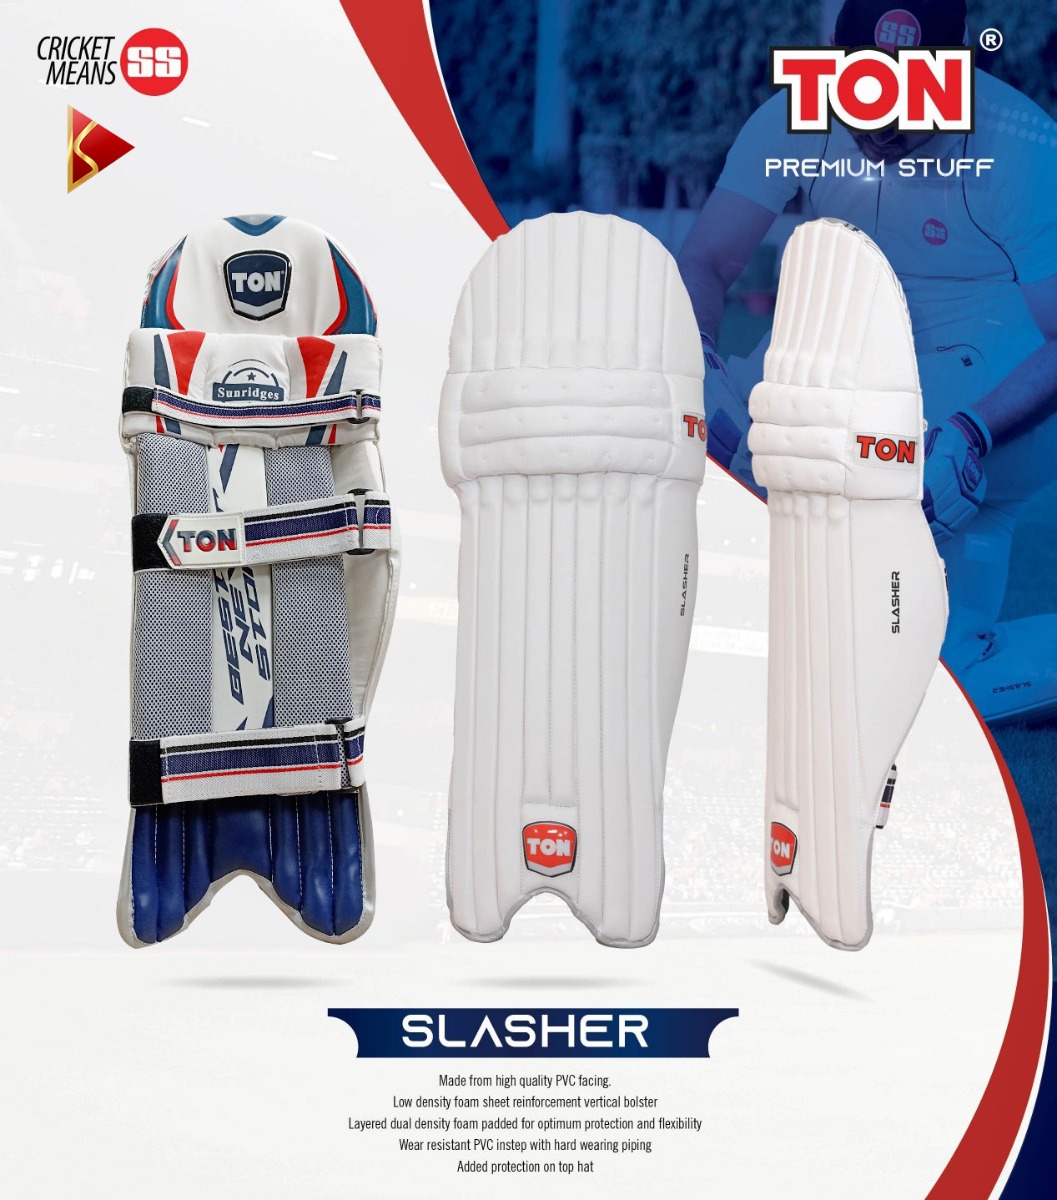 SS Ton Slasher Batting Pads Features